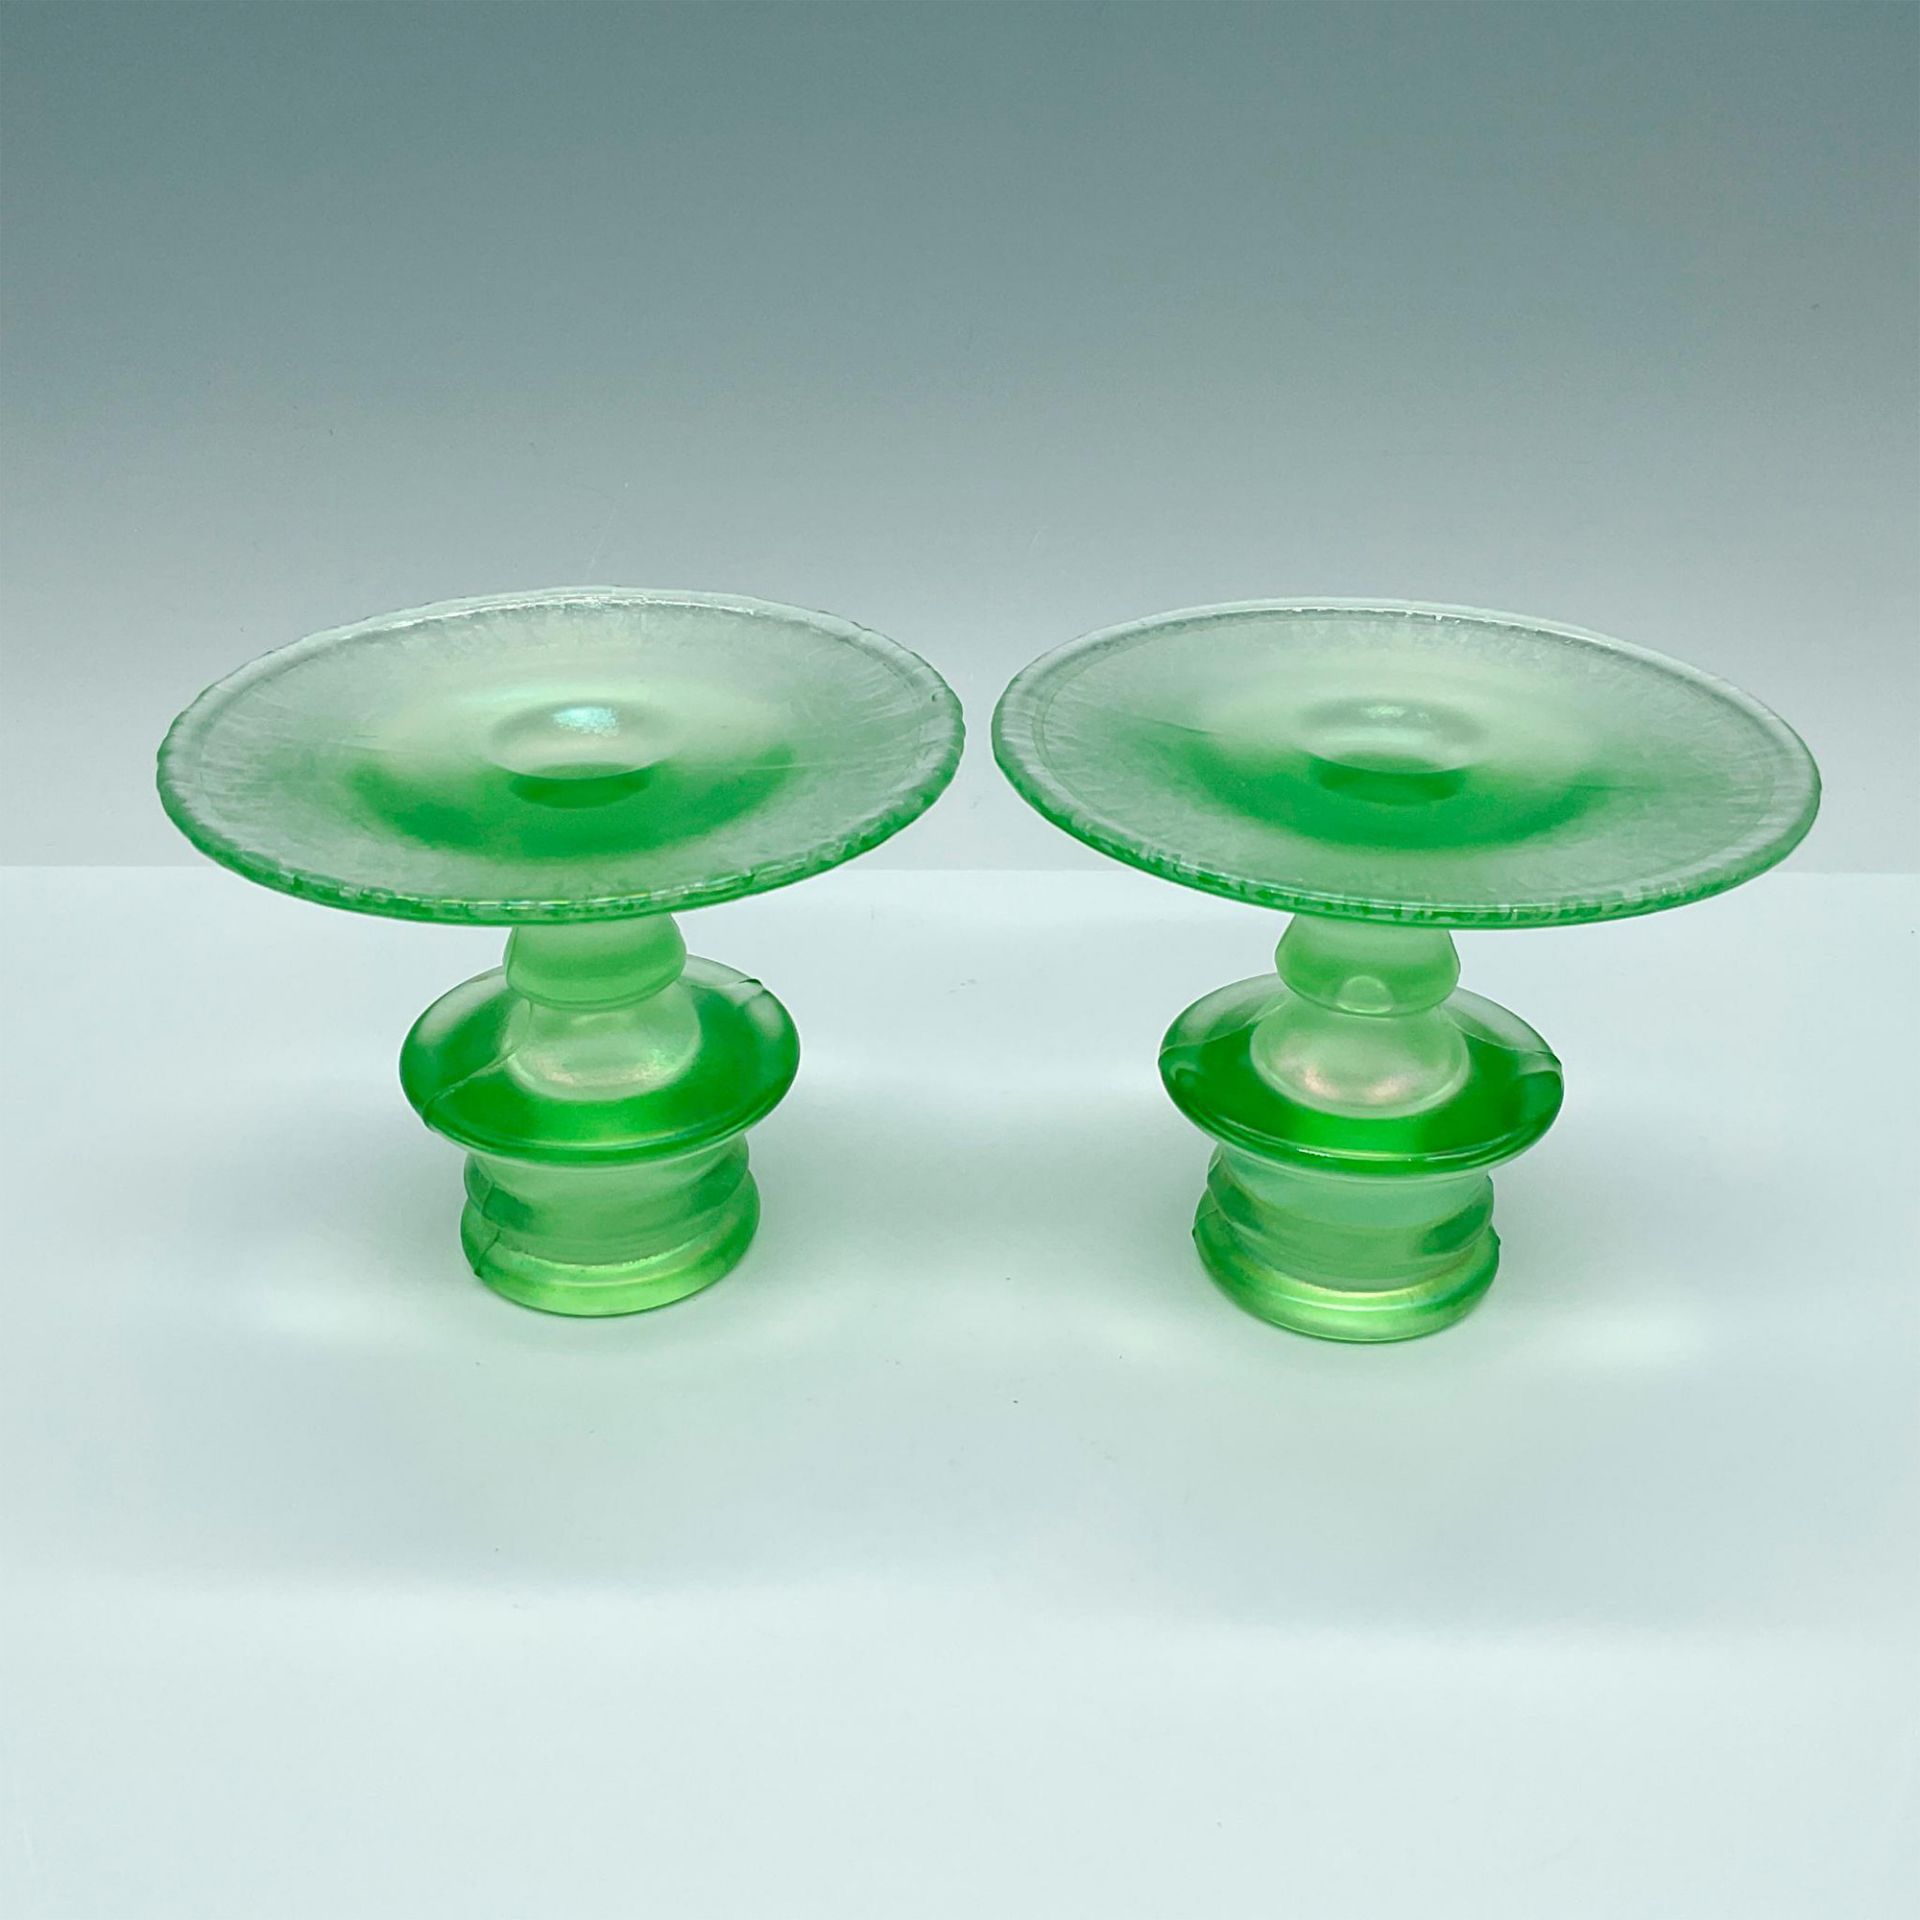 Pair of Antique Fenton Florentine Green Candle Holders - Image 3 of 3